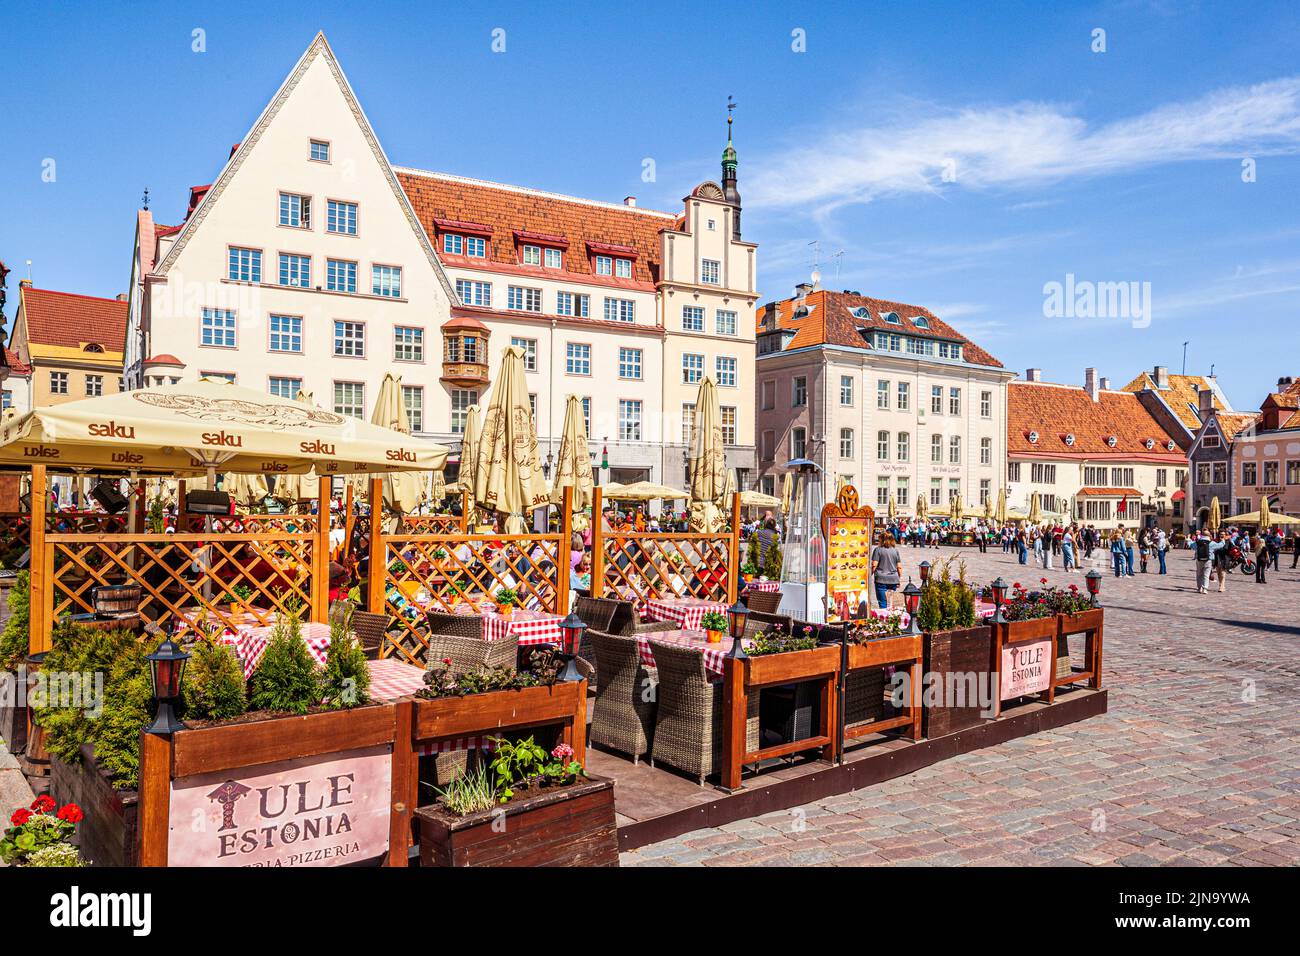 Al fresco cafes in the bustling Town Hall Square in the Old Town of Tallinn the capital city of Estonia Stock Photo